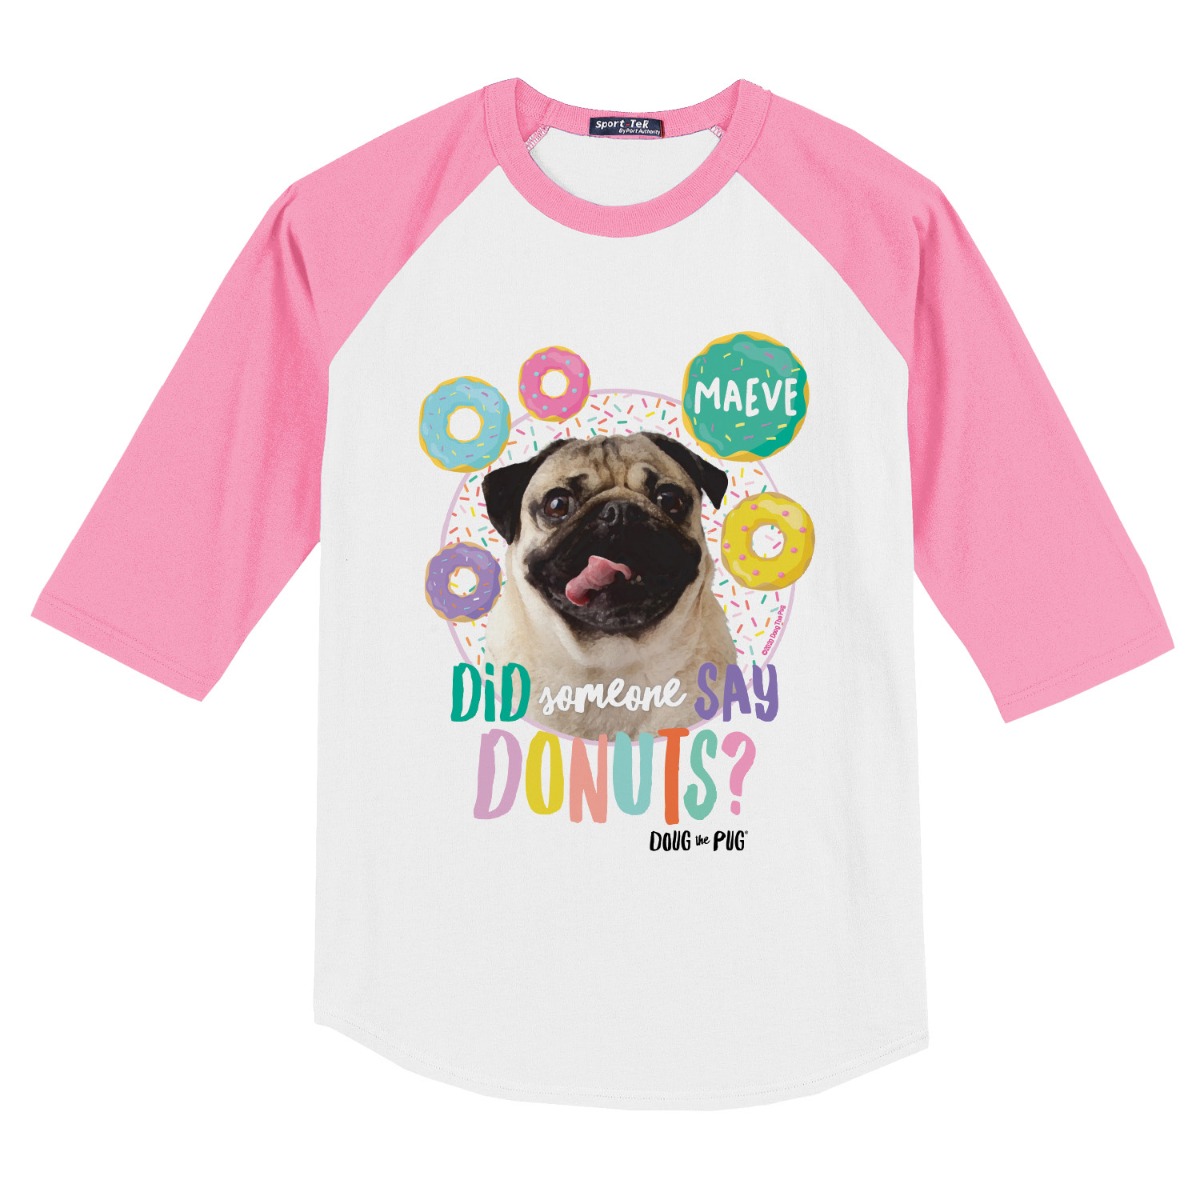 Doug The Pug Donuts Personalized Pink Sports Jersey